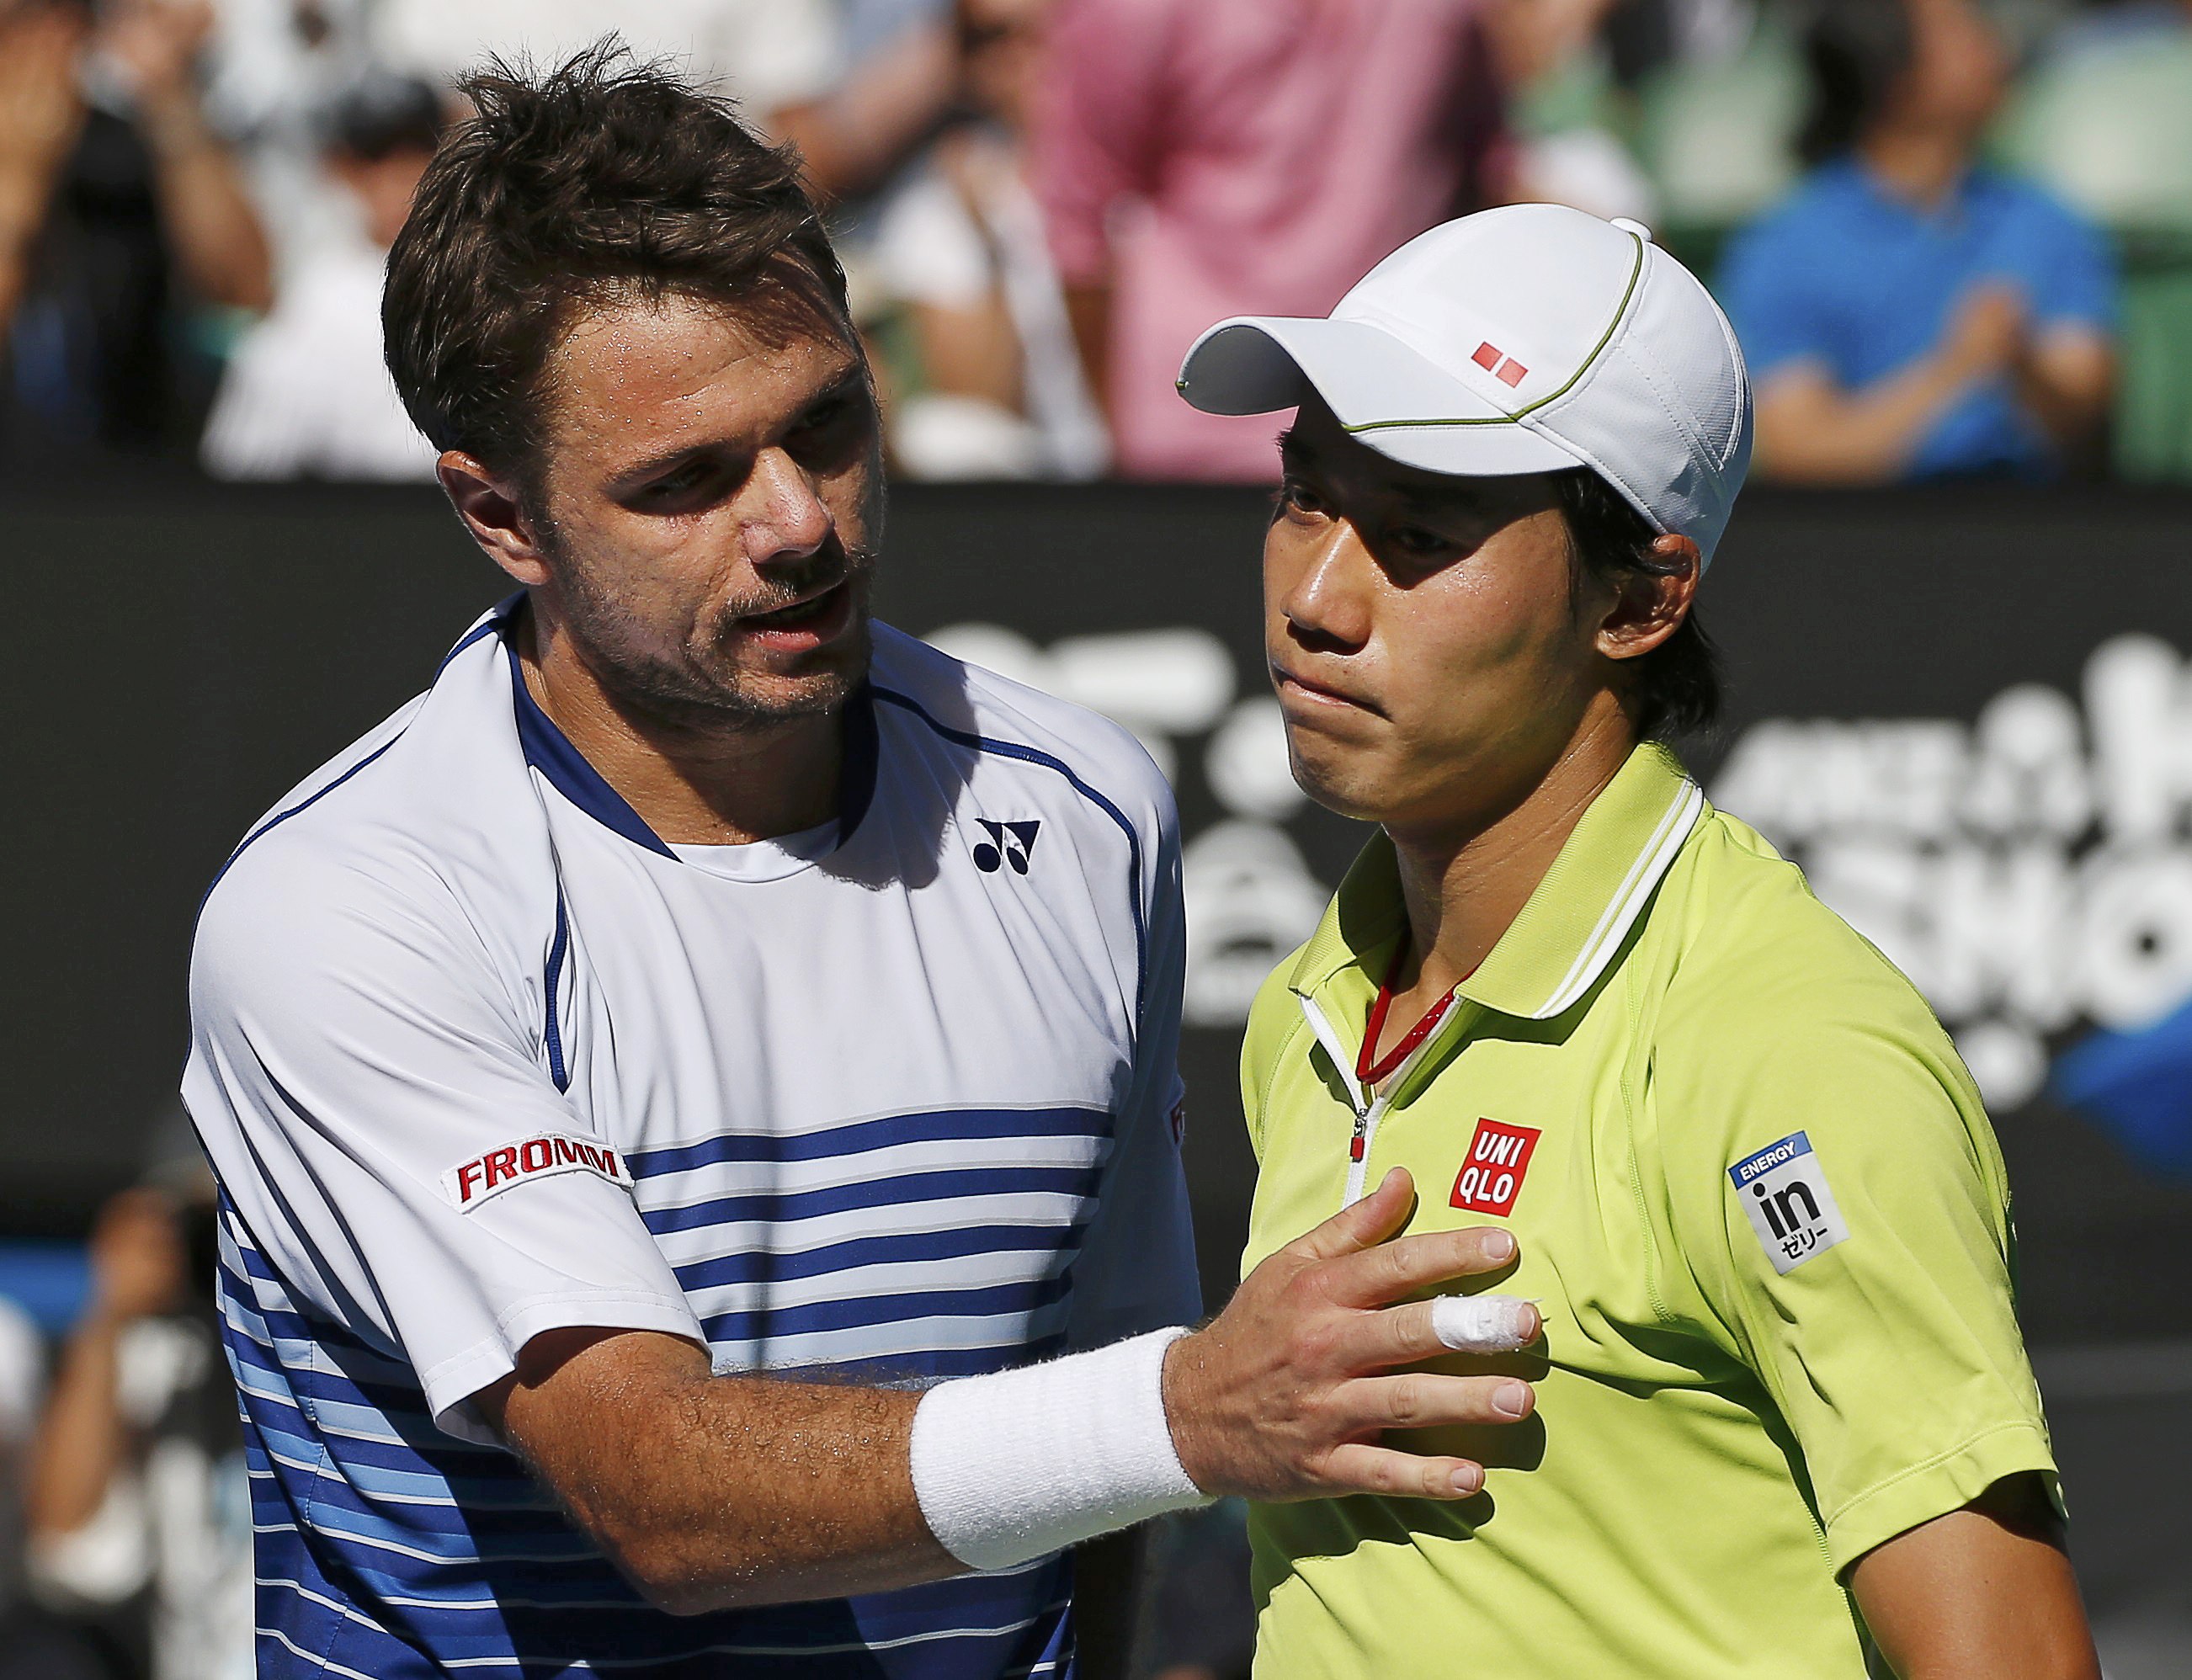 Kei Nishikori (R) of Japan reacts after shaking hands with Stan Wawrinka of Switzerland following his loss in their men's singles quarter-final match at the Australian Open 2015 tennis tournament in Melbourne January 28, 2015. REUTERS/Athit Perawongmetha (AUSTRALIA - Tags: SPORT TENNIS TPX IMAGES OF THE DAY)